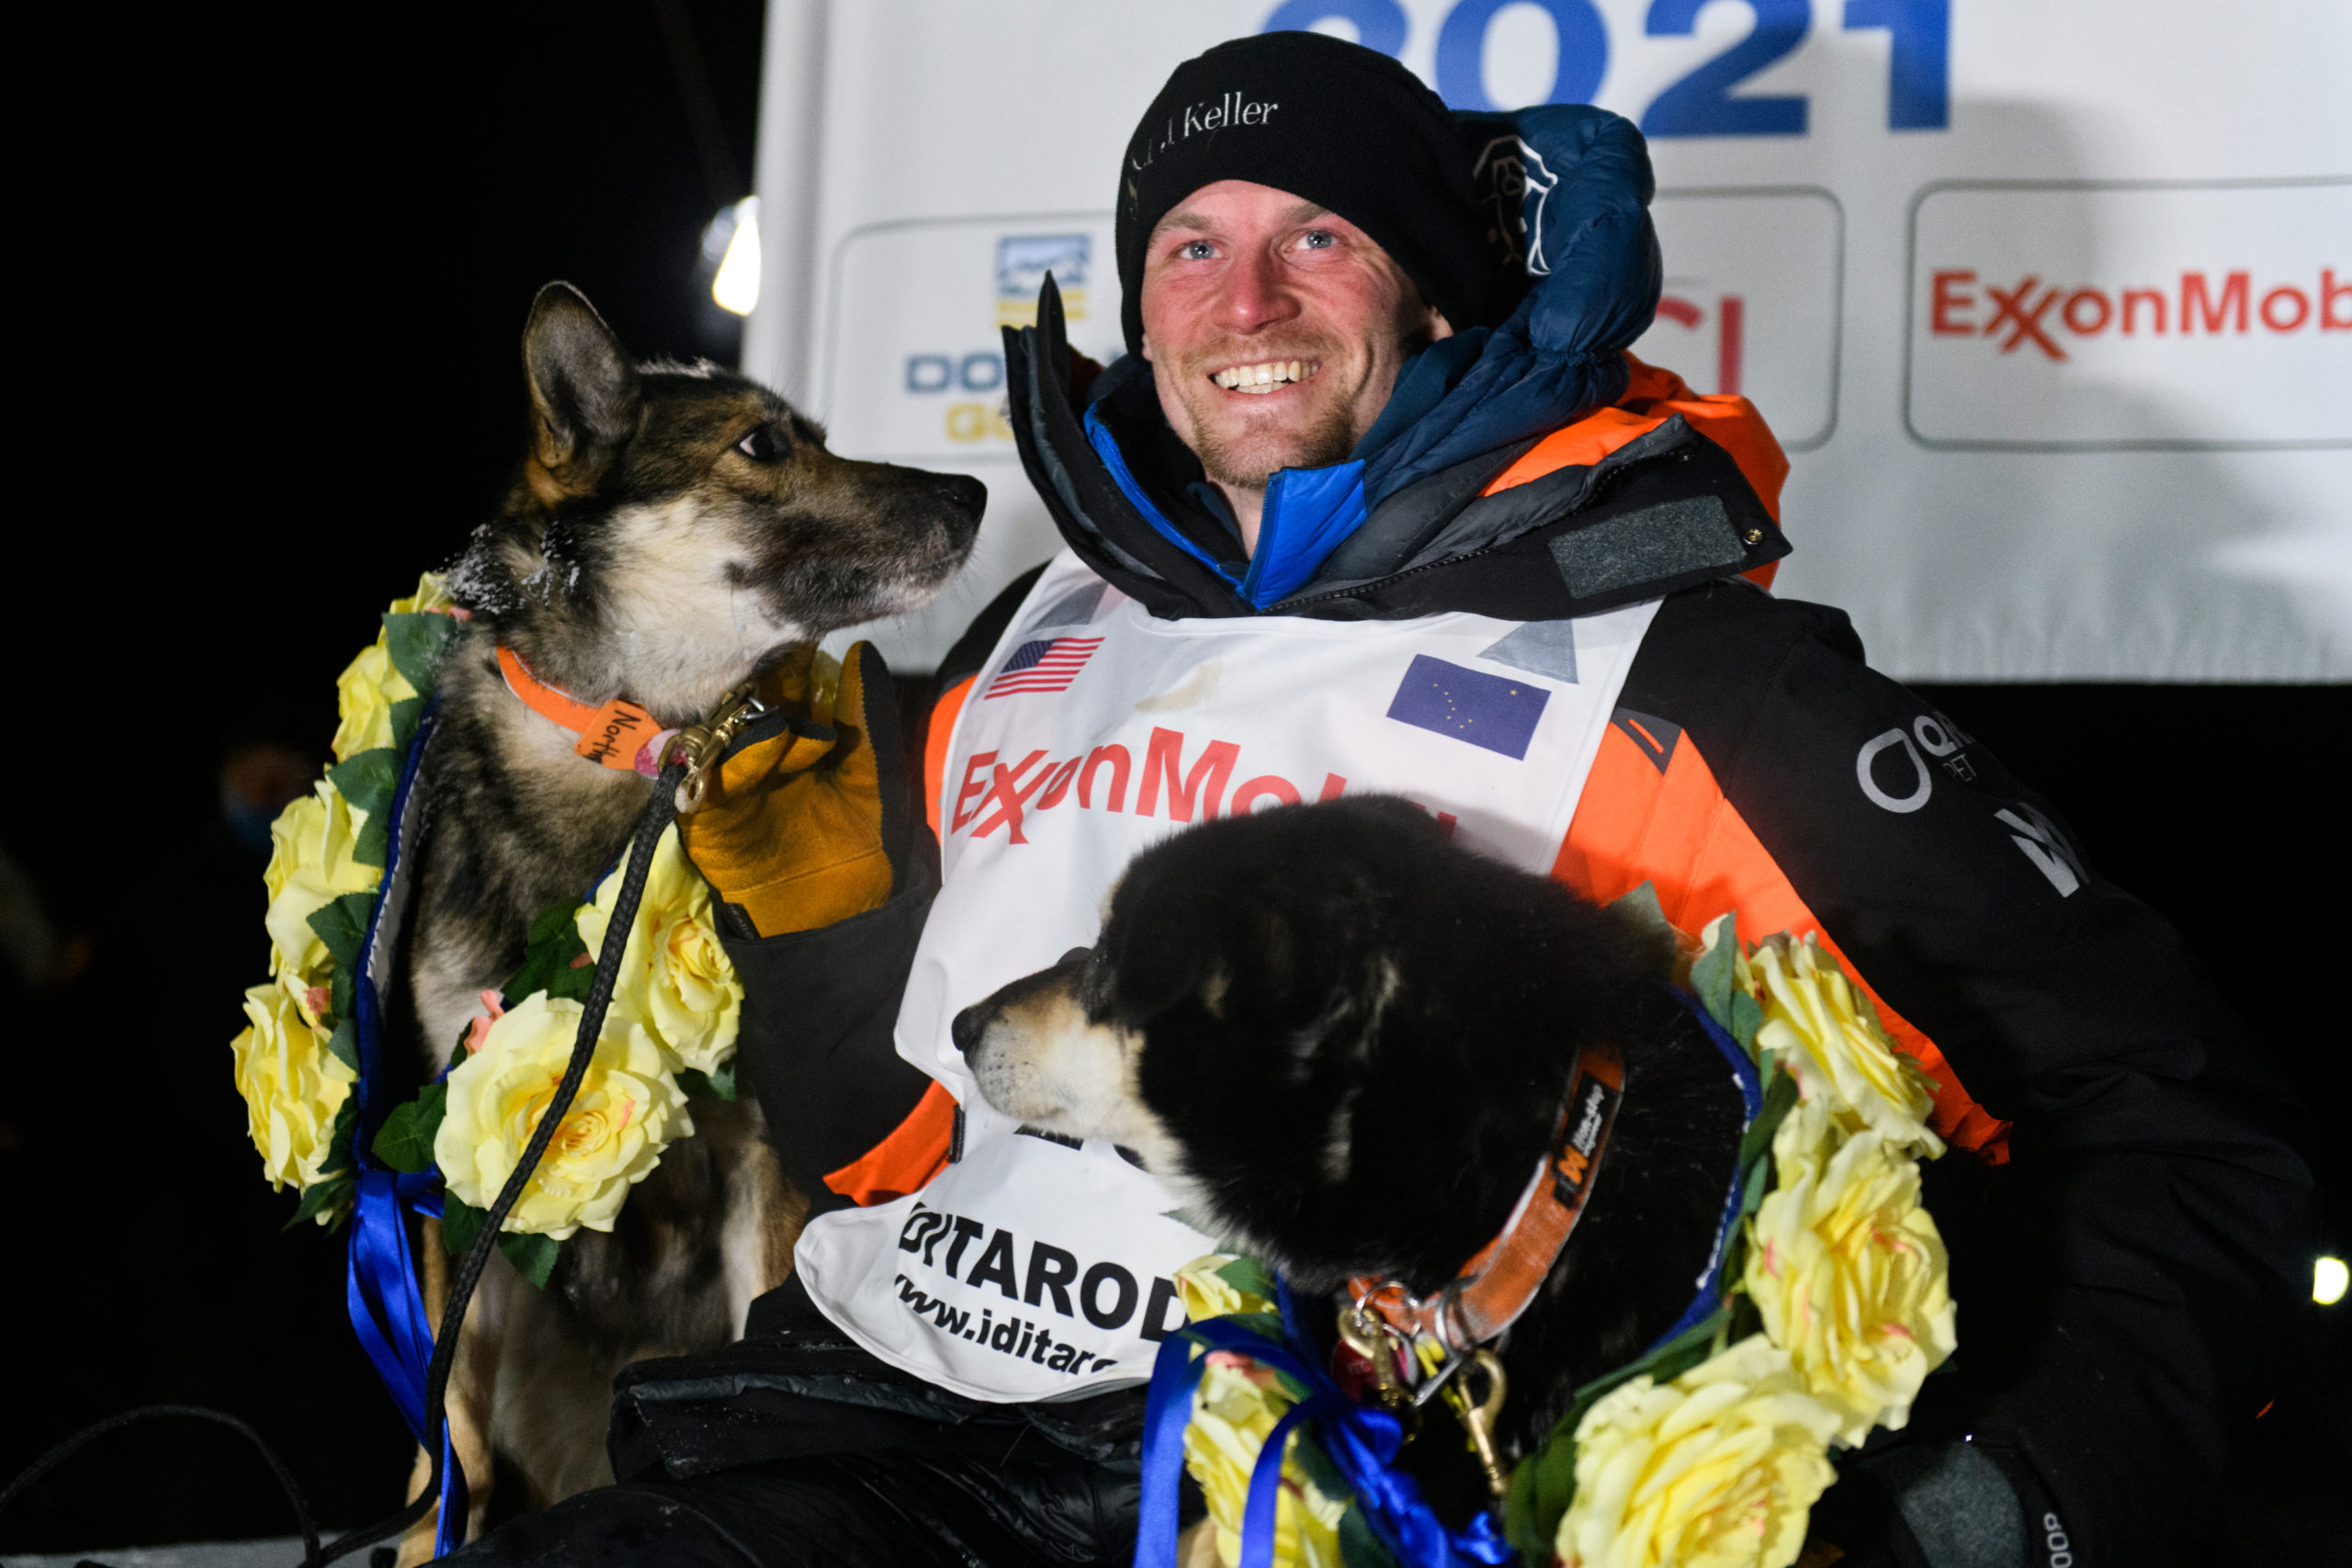 An Iditarod musher poses with two dogs wearing yellow flowers.